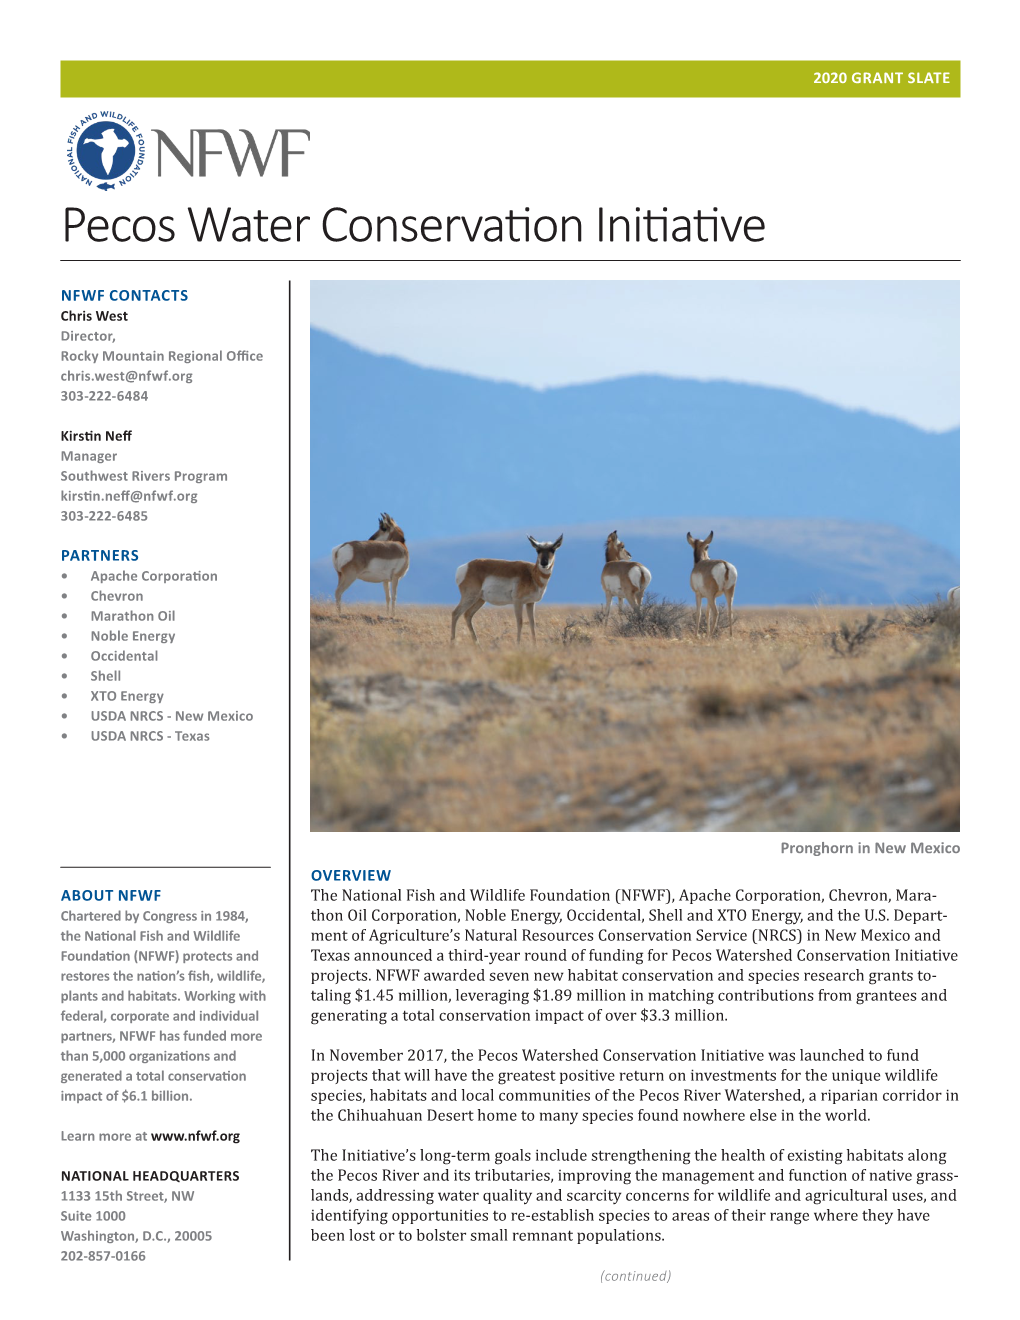 Pecos Water Conservation Initiative